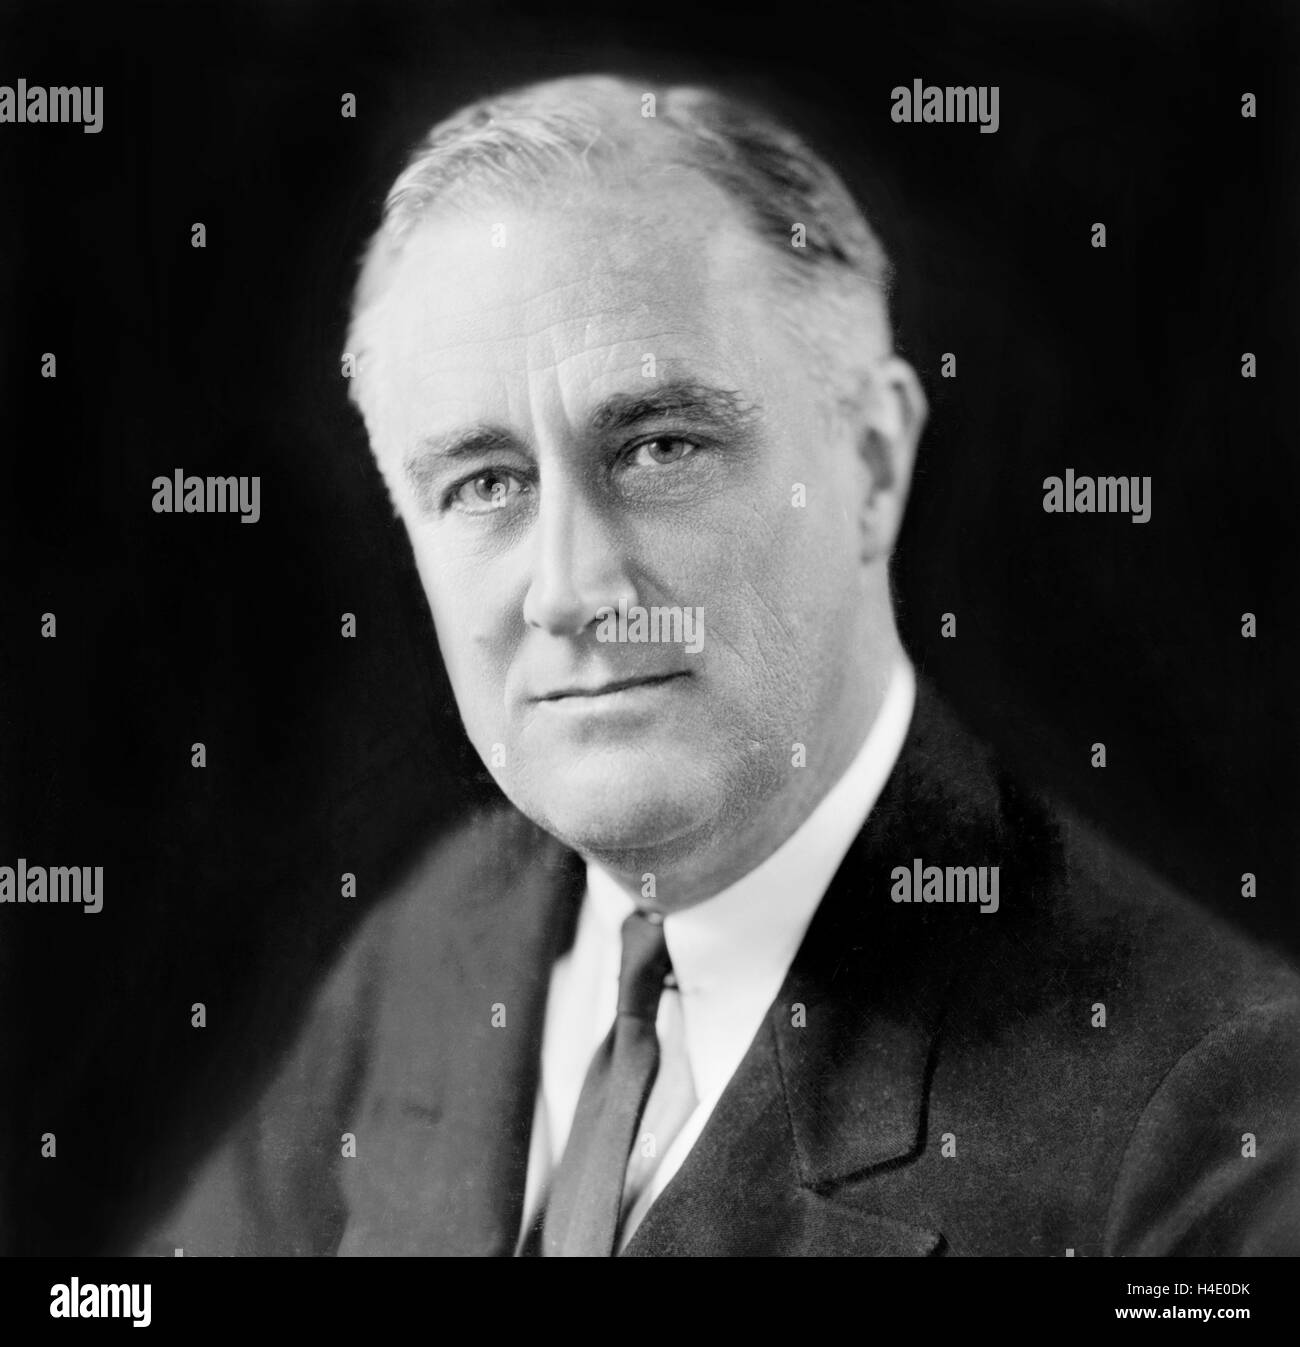 Franklin D Roosevelt (1882-1945), portrait of the 32nd President of the USA, c. Dec 1933 Stock Photo